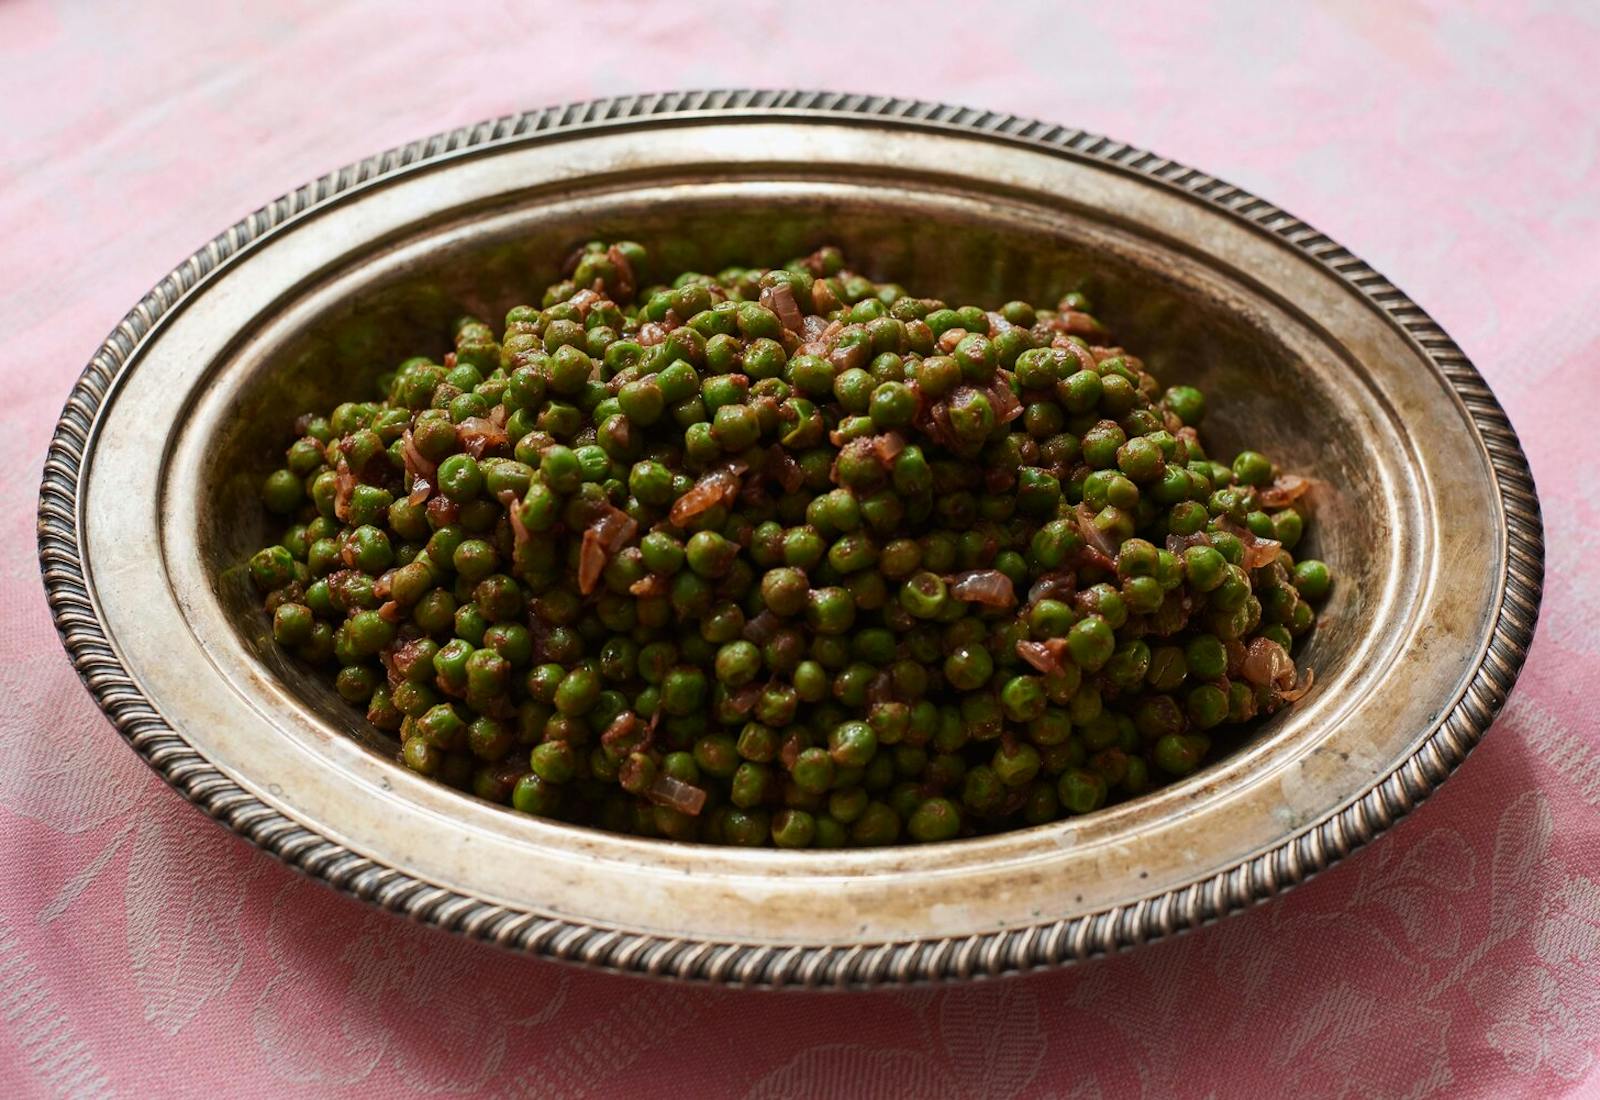 Peas with allspice in bronze serving bowl atop pink tablecloth.